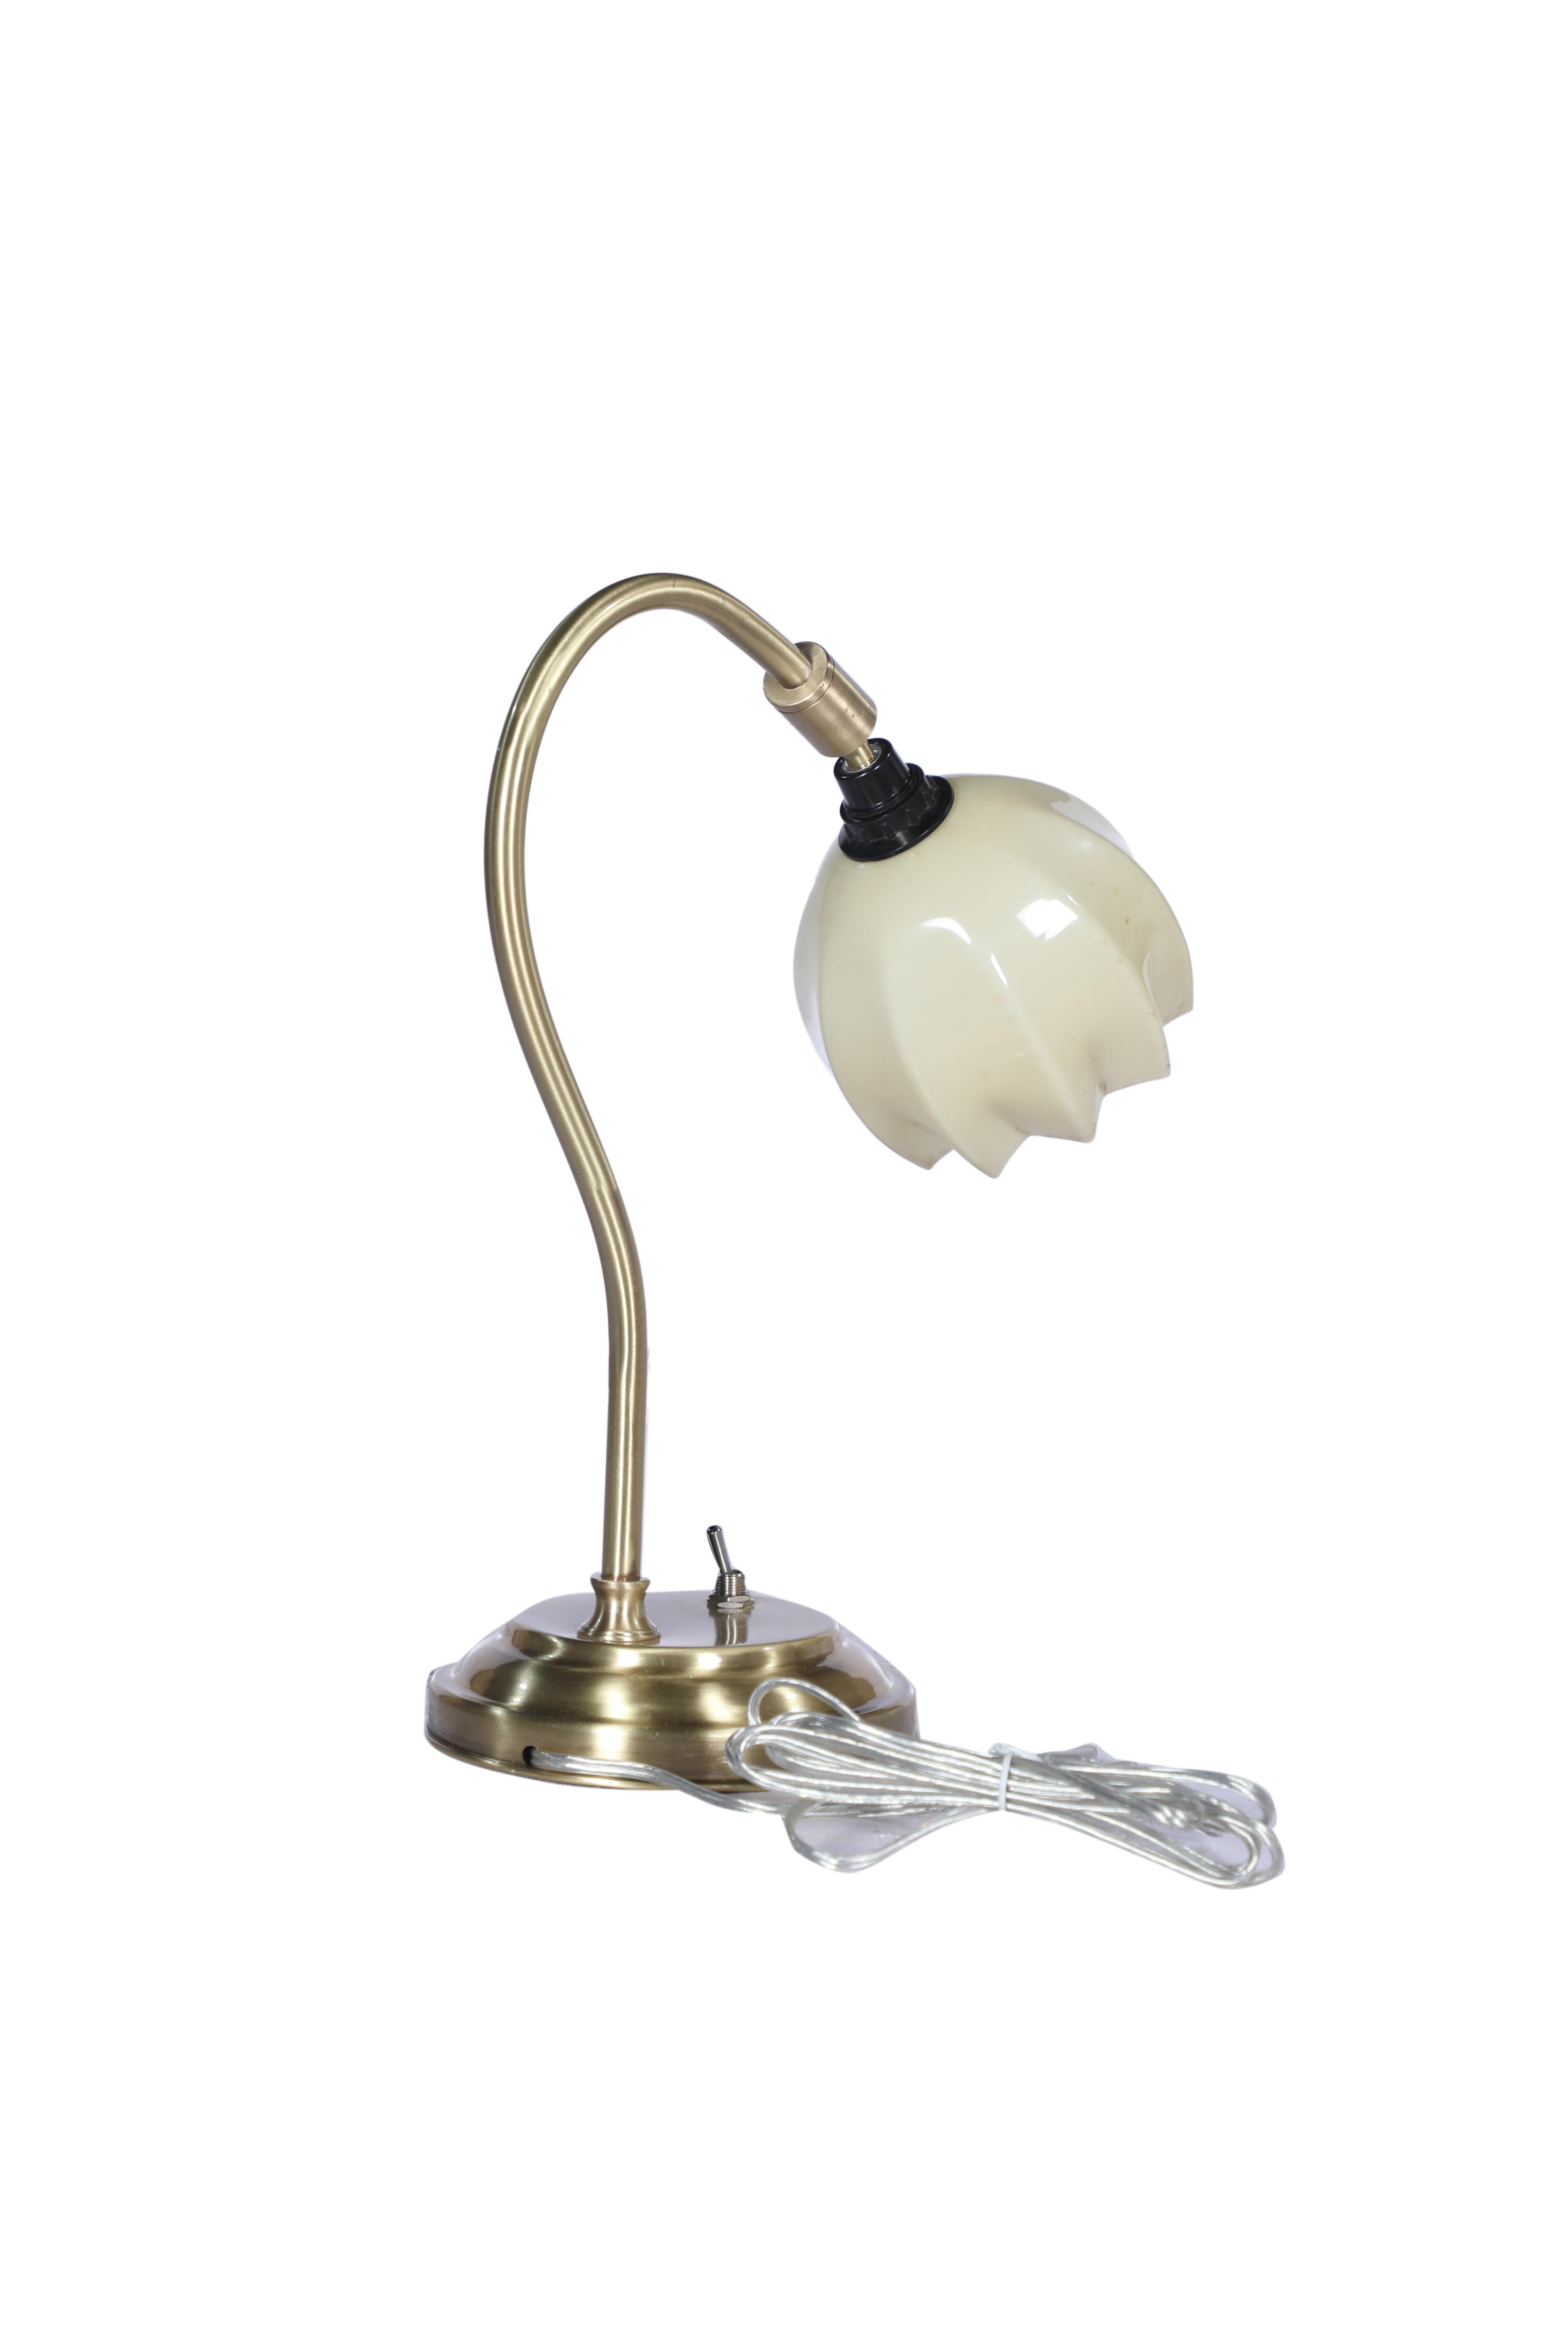 European Art Deco Desk or Table Lamp with Art Glass Flower Shade For Sale